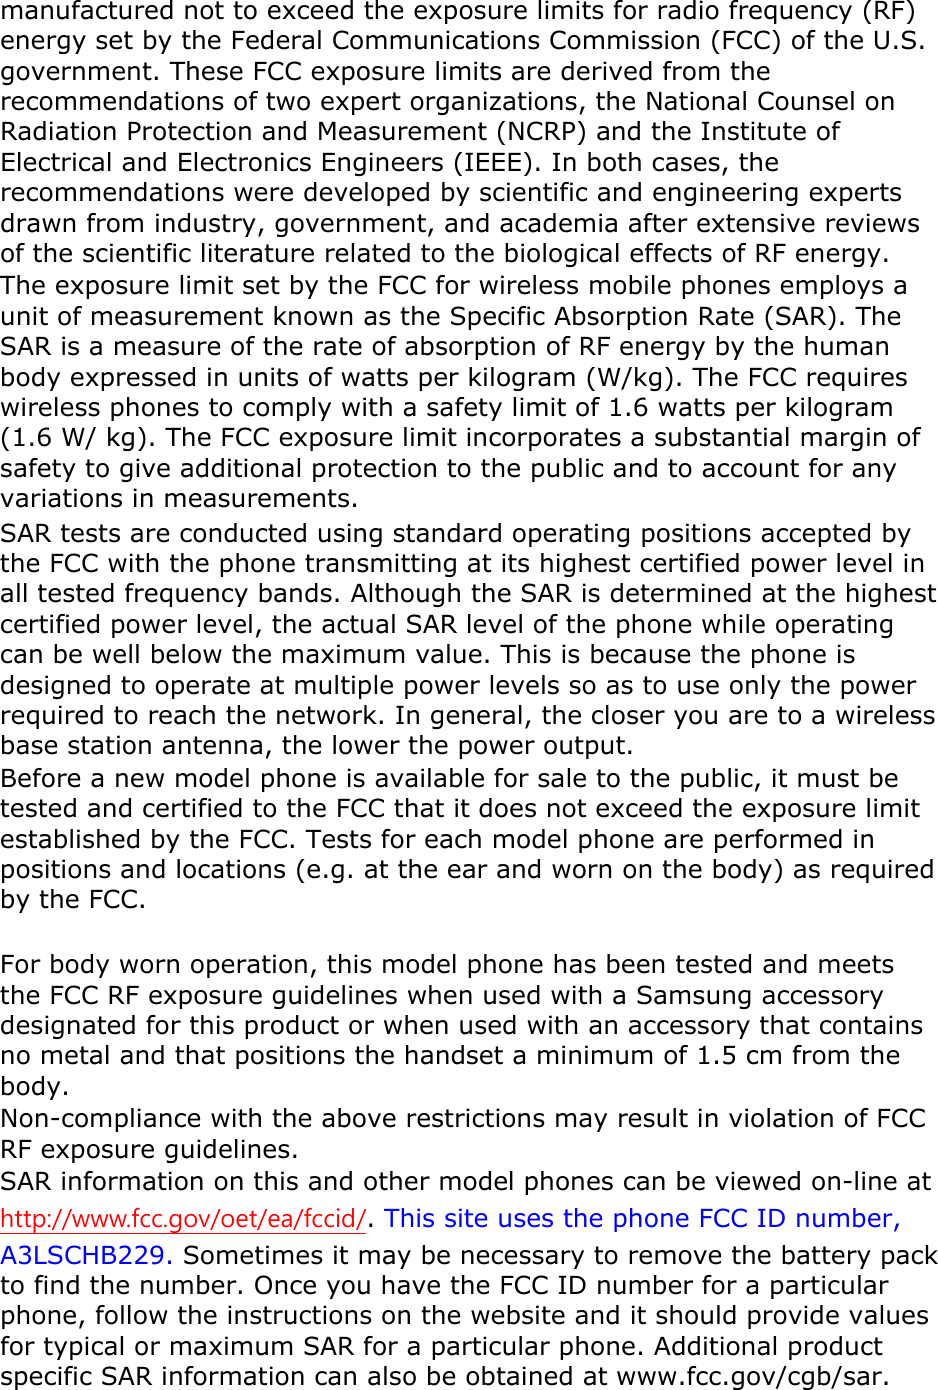 manufactured not to exceed the exposure limits for radio frequency (RF) energy set by the Federal Communications Commission (FCC) of the U.S. government. These FCC exposure limits are derived from the recommendations of two expert organizations, the National Counsel on Radiation Protection and Measurement (NCRP) and the Institute of Electrical and Electronics Engineers (IEEE). In both cases, the recommendations were developed by scientific and engineering experts drawn from industry, government, and academia after extensive reviews of the scientific literature related to the biological effects of RF energy. The exposure limit set by the FCC for wireless mobile phones employs a unit of measurement known as the Specific Absorption Rate (SAR). The SAR is a measure of the rate of absorption of RF energy by the human body expressed in units of watts per kilogram (W/kg). The FCC requires wireless phones to comply with a safety limit of 1.6 watts per kilogram (1.6 W/ kg). The FCC exposure limit incorporates a substantial margin of safety to give additional protection to the public and to account for any variations in measurements. SAR tests are conducted using standard operating positions accepted by the FCC with the phone transmitting at its highest certified power level in all tested frequency bands. Although the SAR is determined at the highest certified power level, the actual SAR level of the phone while operating can be well below the maximum value. This is because the phone is designed to operate at multiple power levels so as to use only the power required to reach the network. In general, the closer you are to a wireless base station antenna, the lower the power output. Before a new model phone is available for sale to the public, it must be tested and certified to the FCC that it does not exceed the exposure limit established by the FCC. Tests for each model phone are performed in positions and locations (e.g. at the ear and worn on the body) as required by the FCC.      For body worn operation, this model phone has been tested and meets the FCC RF exposure guidelines when used with a Samsung accessory designated for this product or when used with an accessory that contains no metal and that positions the handset a minimum of 1.5 cm from the body.  Non-compliance with the above restrictions may result in violation of FCC RF exposure guidelines. SAR information on this and other model phones can be viewed on-line at http://www.fcc.gov/oet/ea/fccid/. This site uses the phone FCC ID number, A3LSCHB229. Sometimes it may be necessary to remove the battery pack to find the number. Once you have the FCC ID number for a particular phone, follow the instructions on the website and it should provide values for typical or maximum SAR for a particular phone. Additional product specific SAR information can also be obtained at www.fcc.gov/cgb/sar. 